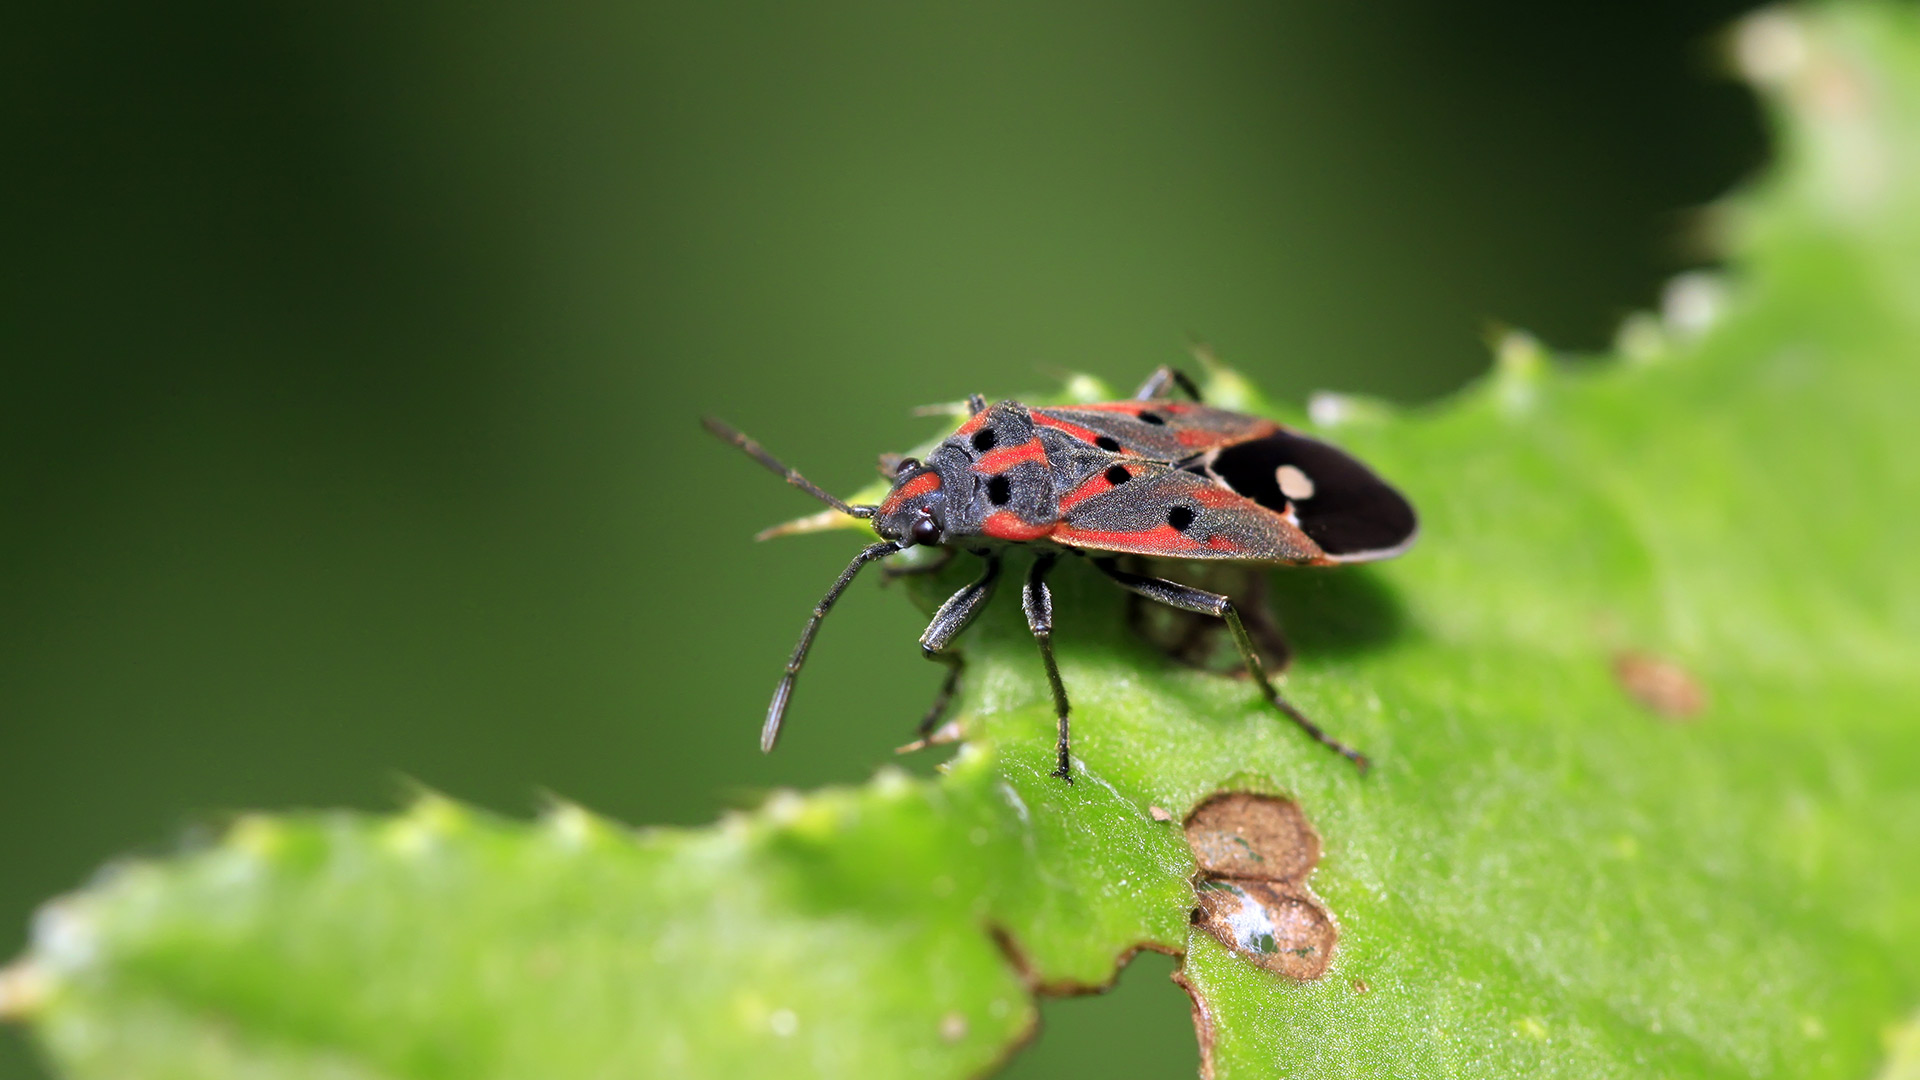 A chinch bug on a damaged leaf in Indianapolis, IN and surrounding areas.